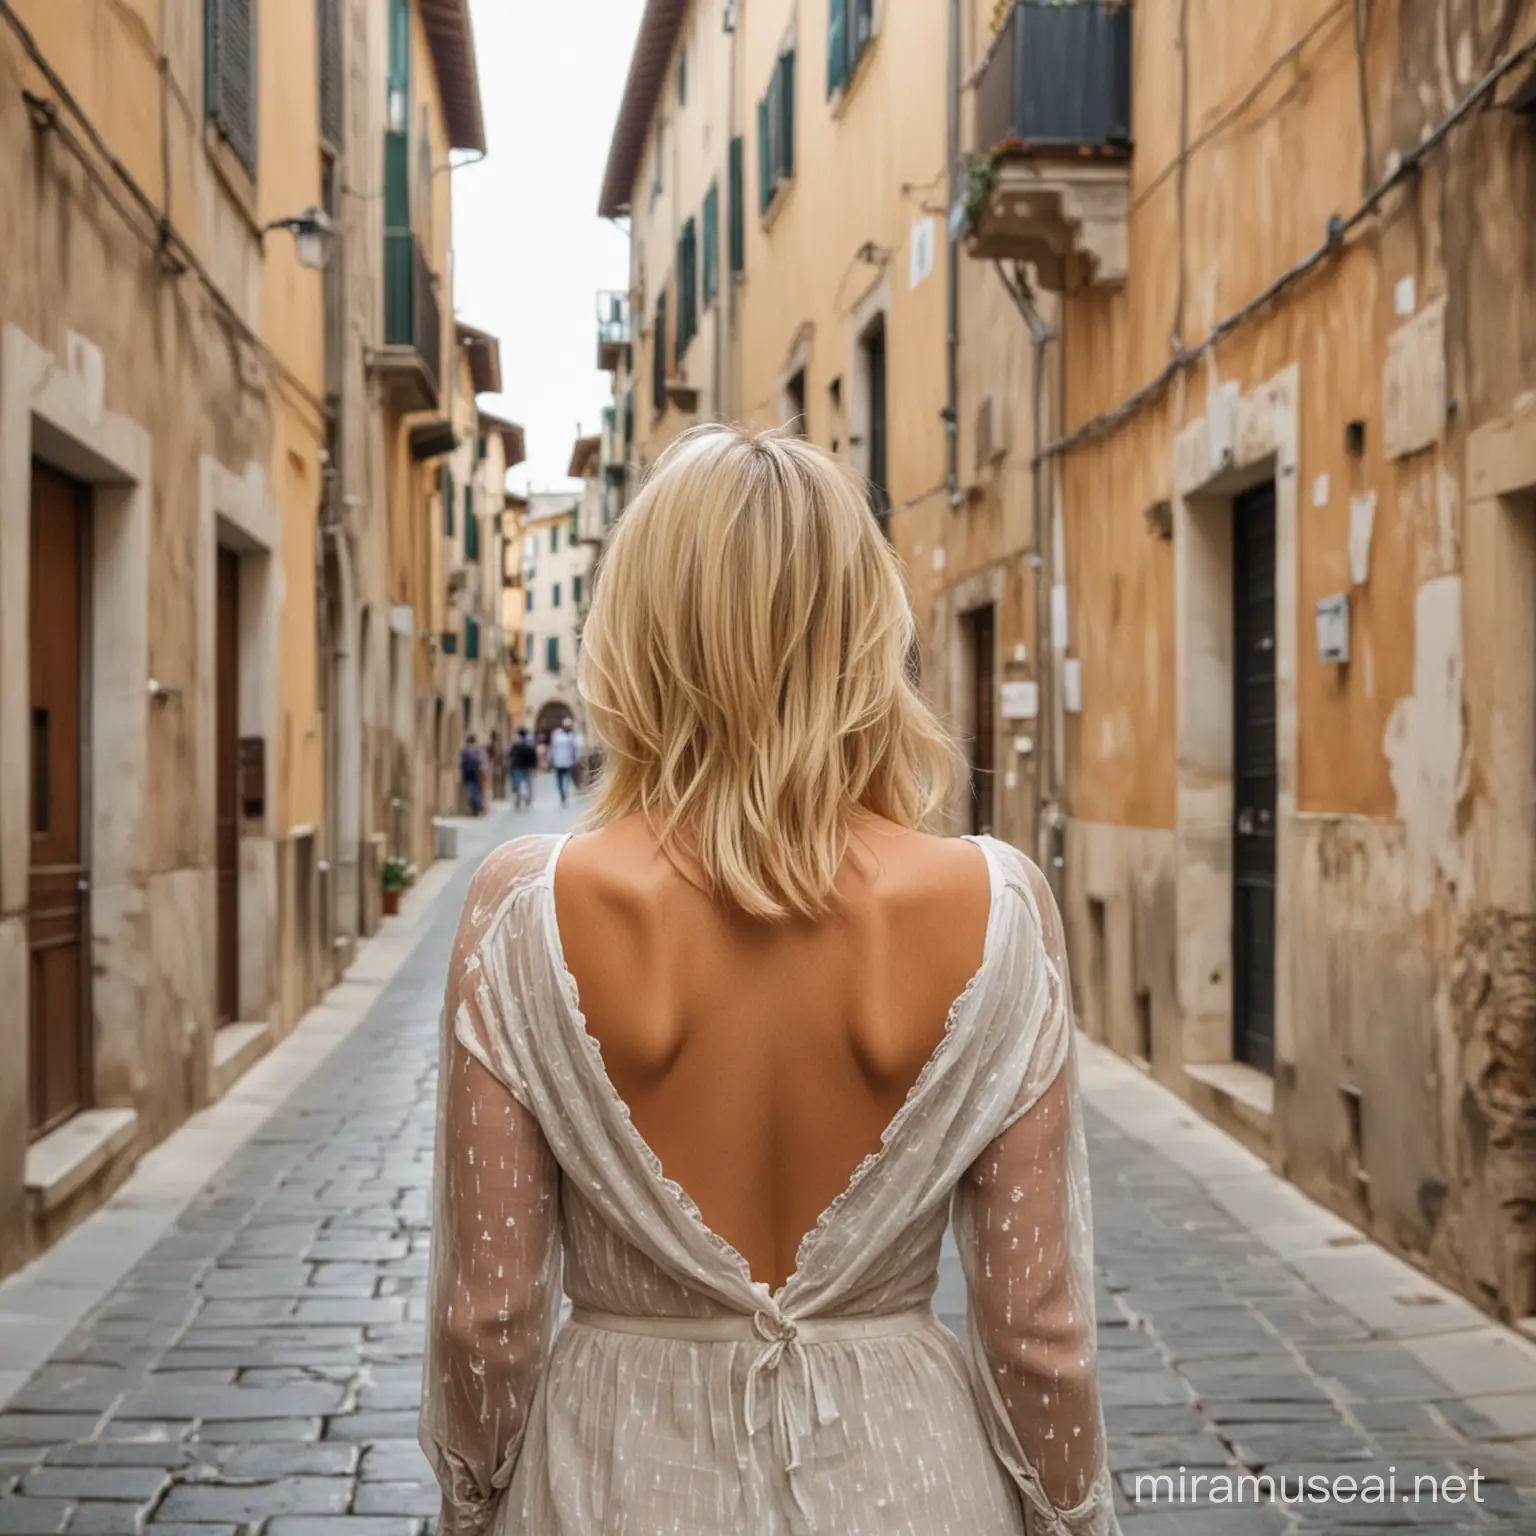 woman with blonde hair and back to camera standing in an old Italian street